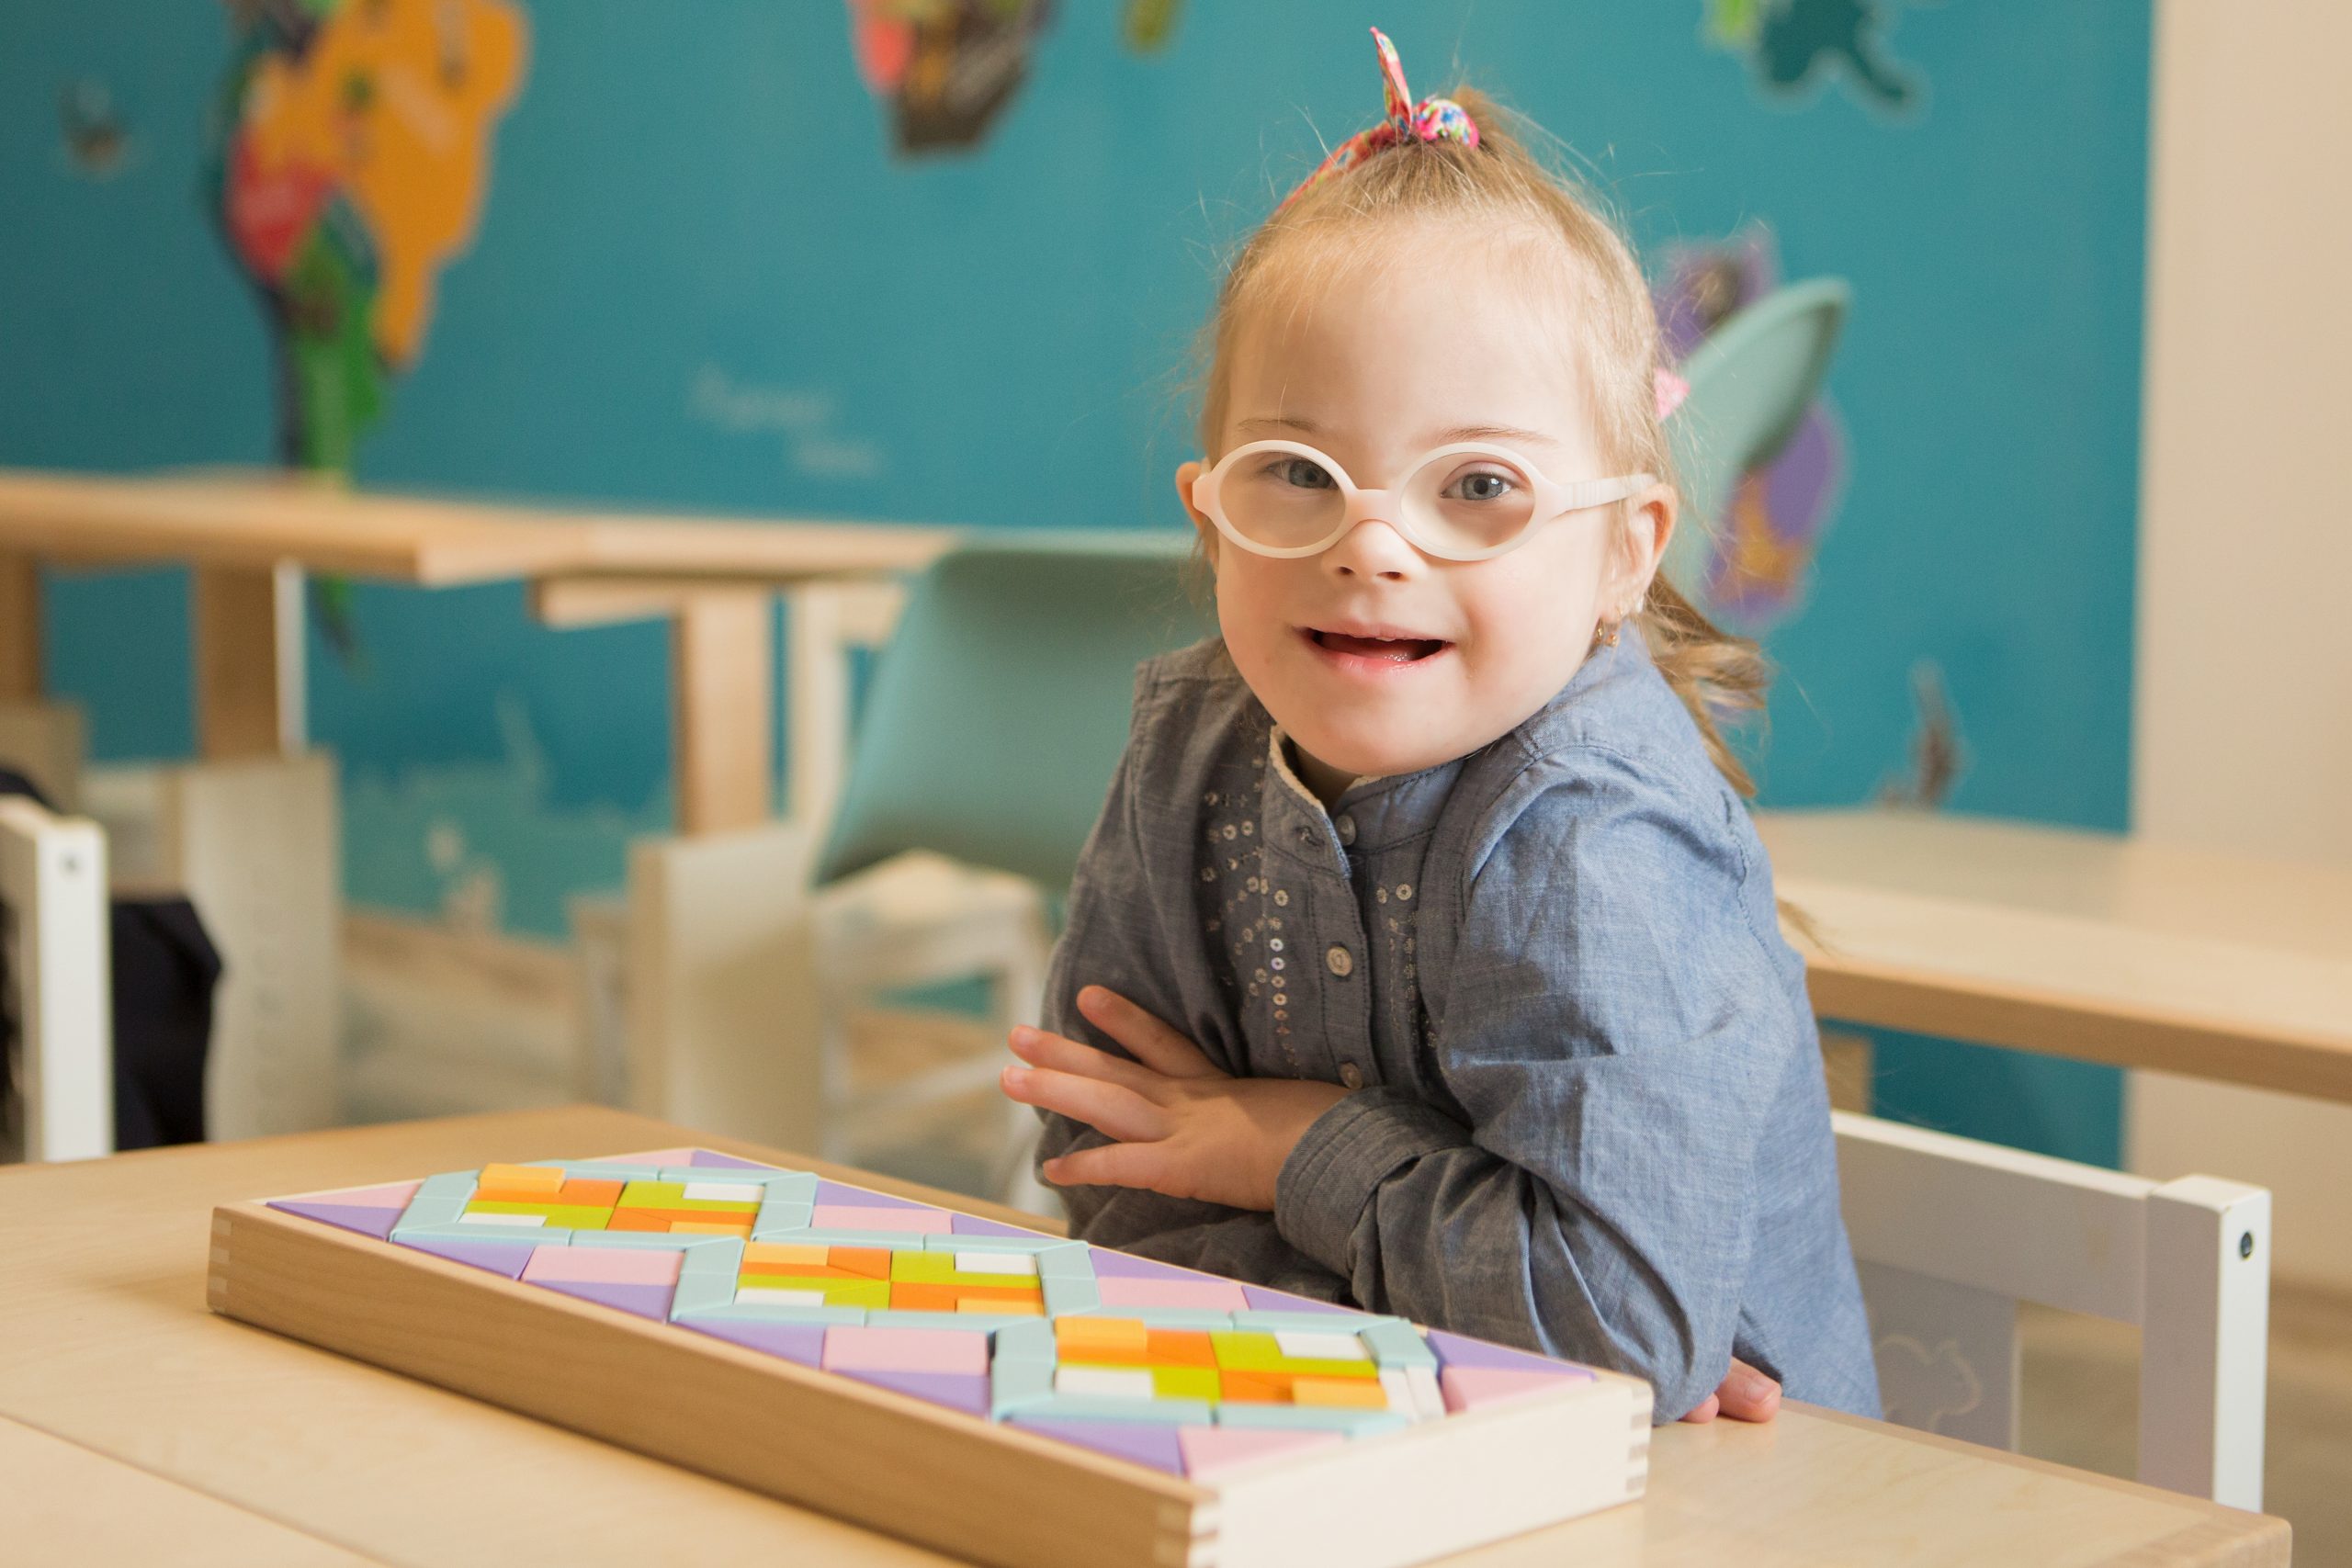 smiling girl with glasses sitting at a classroom desk. A box of pattern blocks are in front of her.